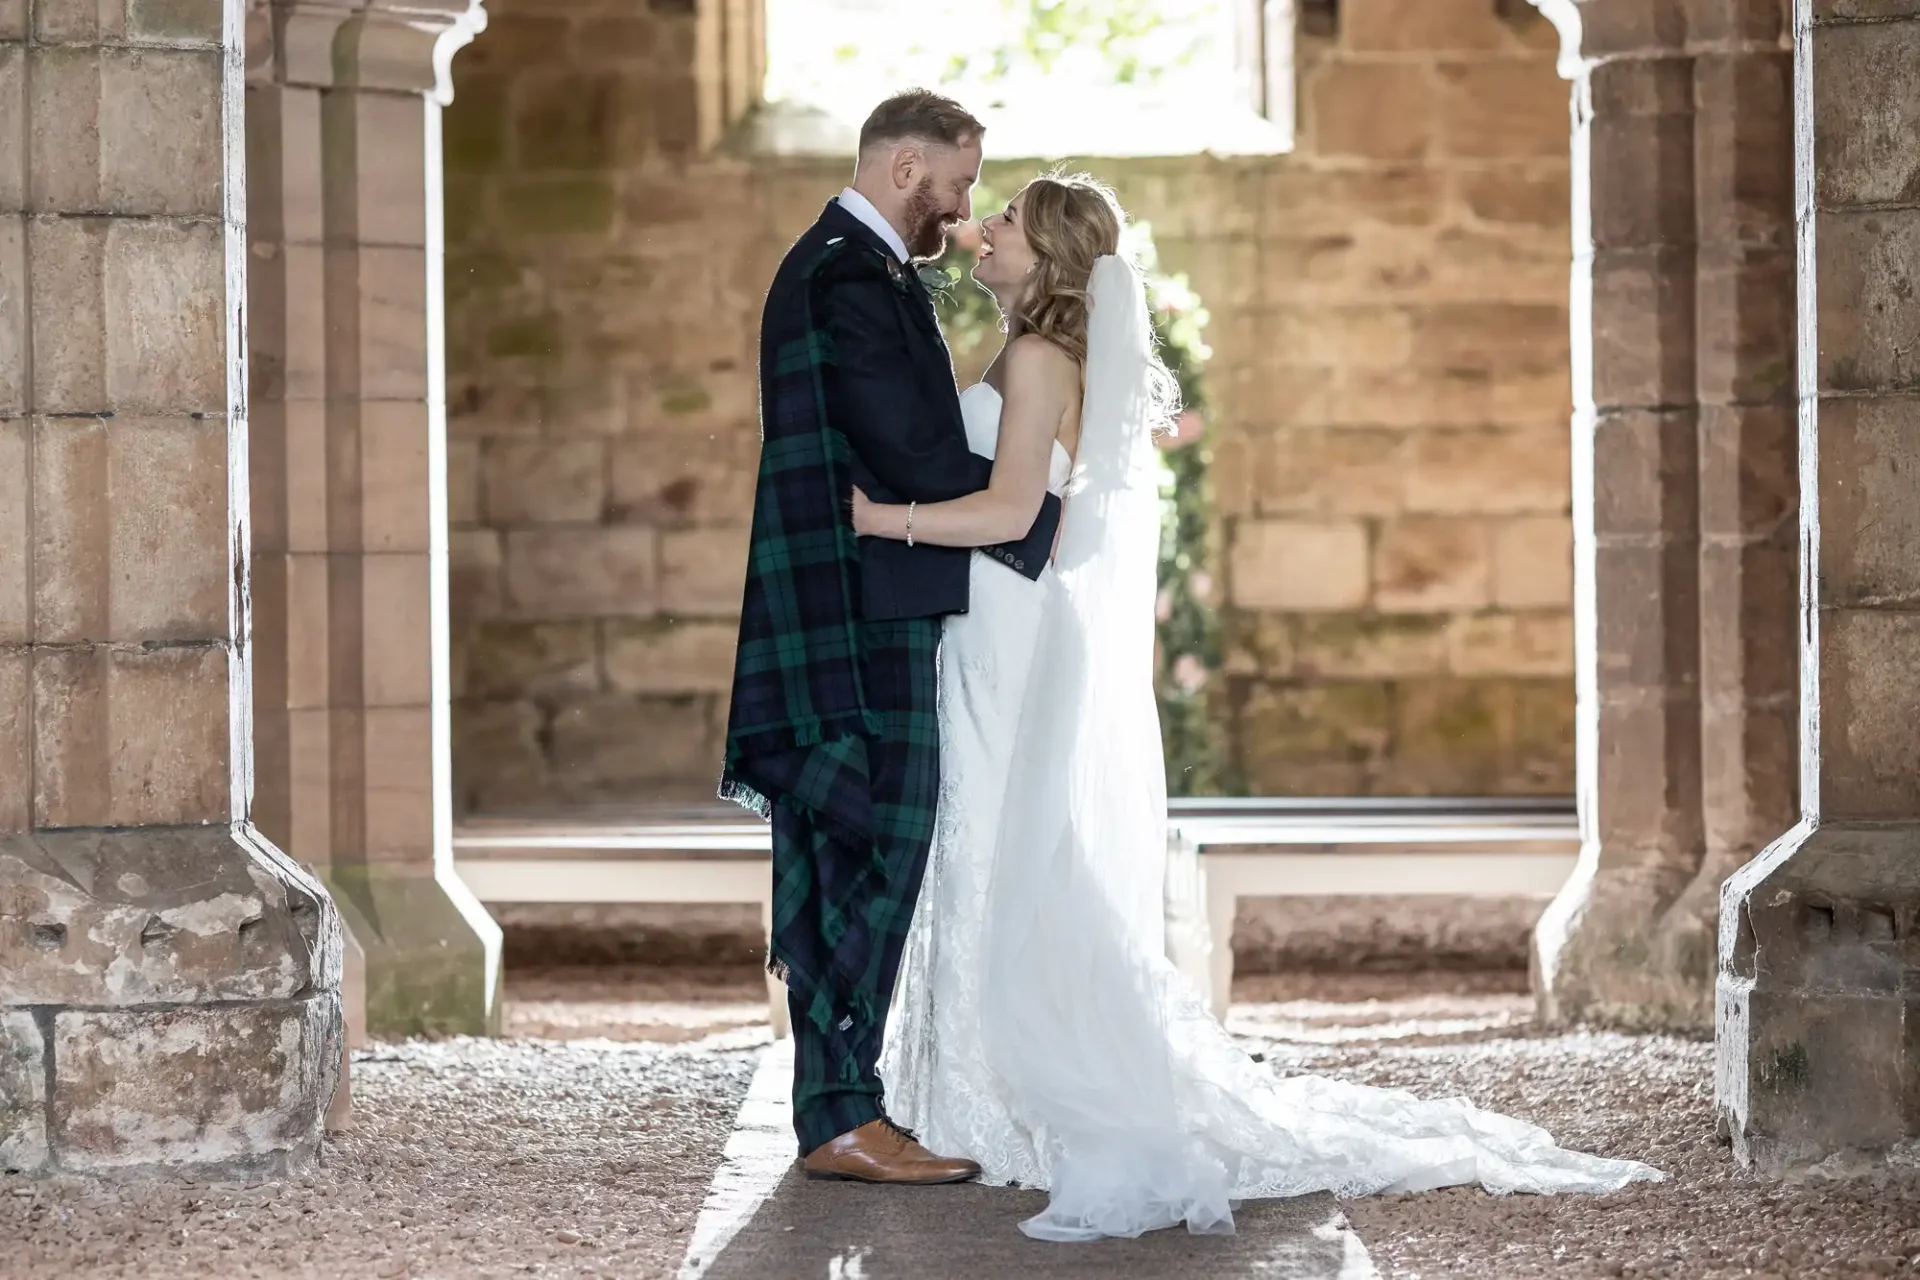 A bride and groom share a romantic moment in a sunlit stone archway, the groom in a tartan kilt and the bride in a white dress with a long train.